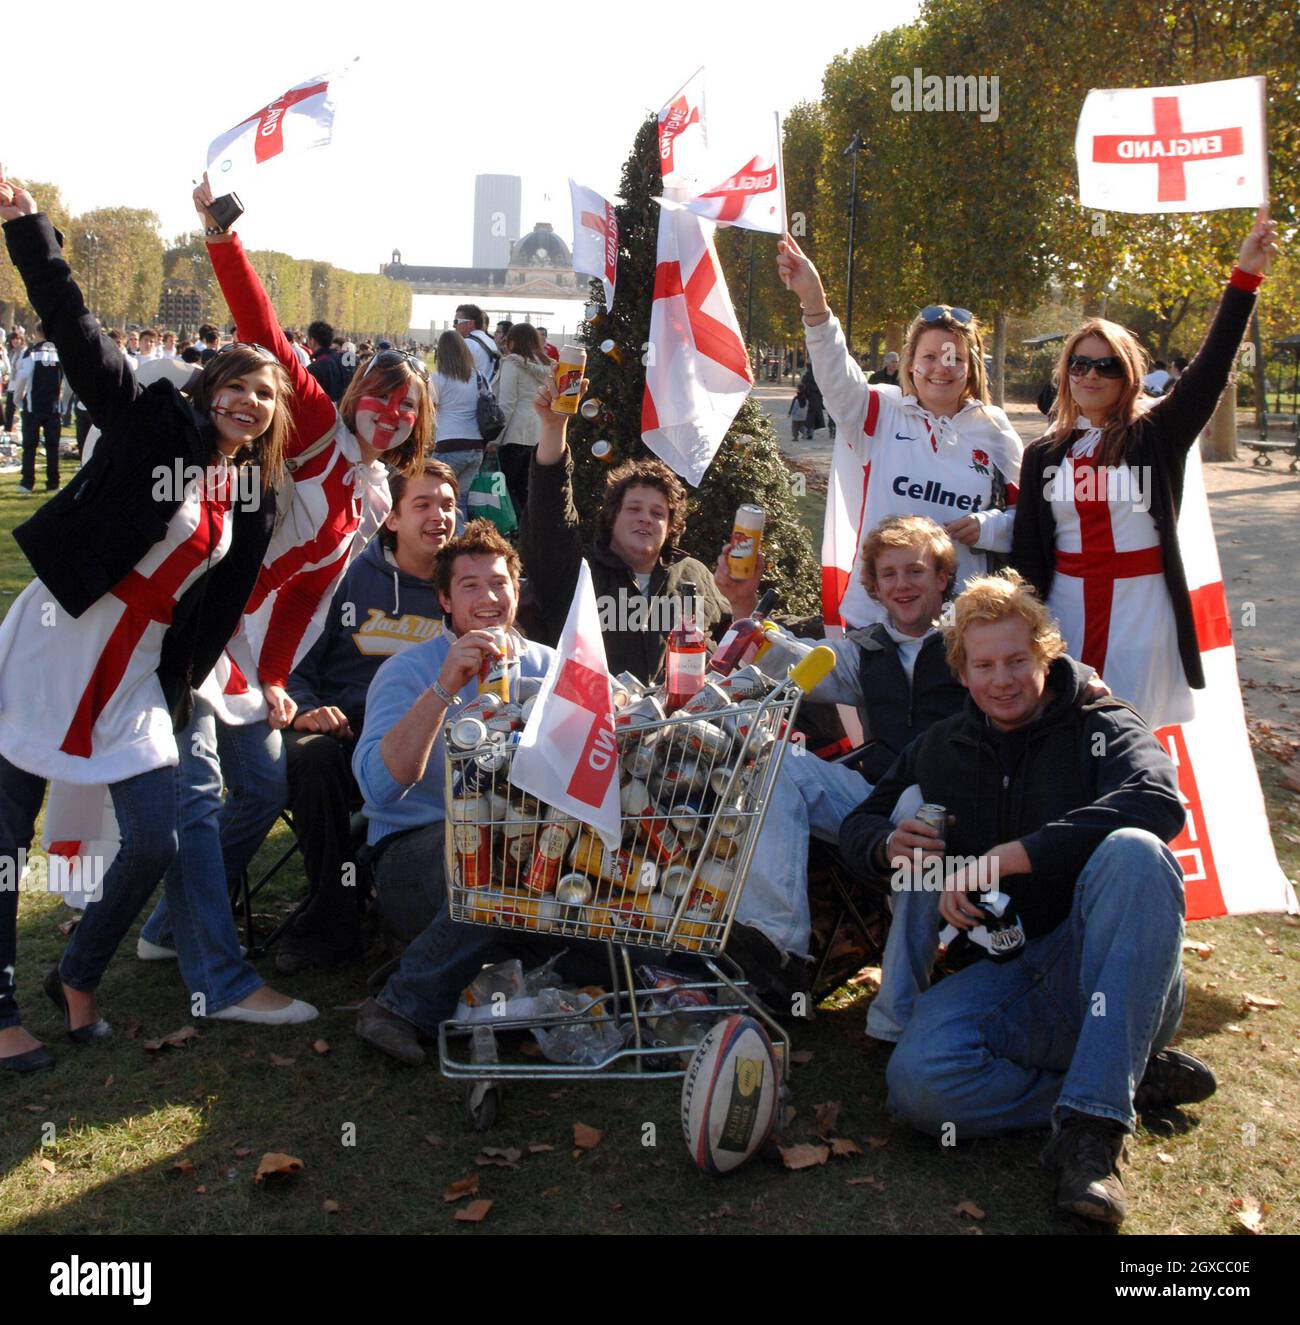 English fans descend on Paris for the Rugby World Cup final between England and South Africa on October 20, 2007. Stock Photo